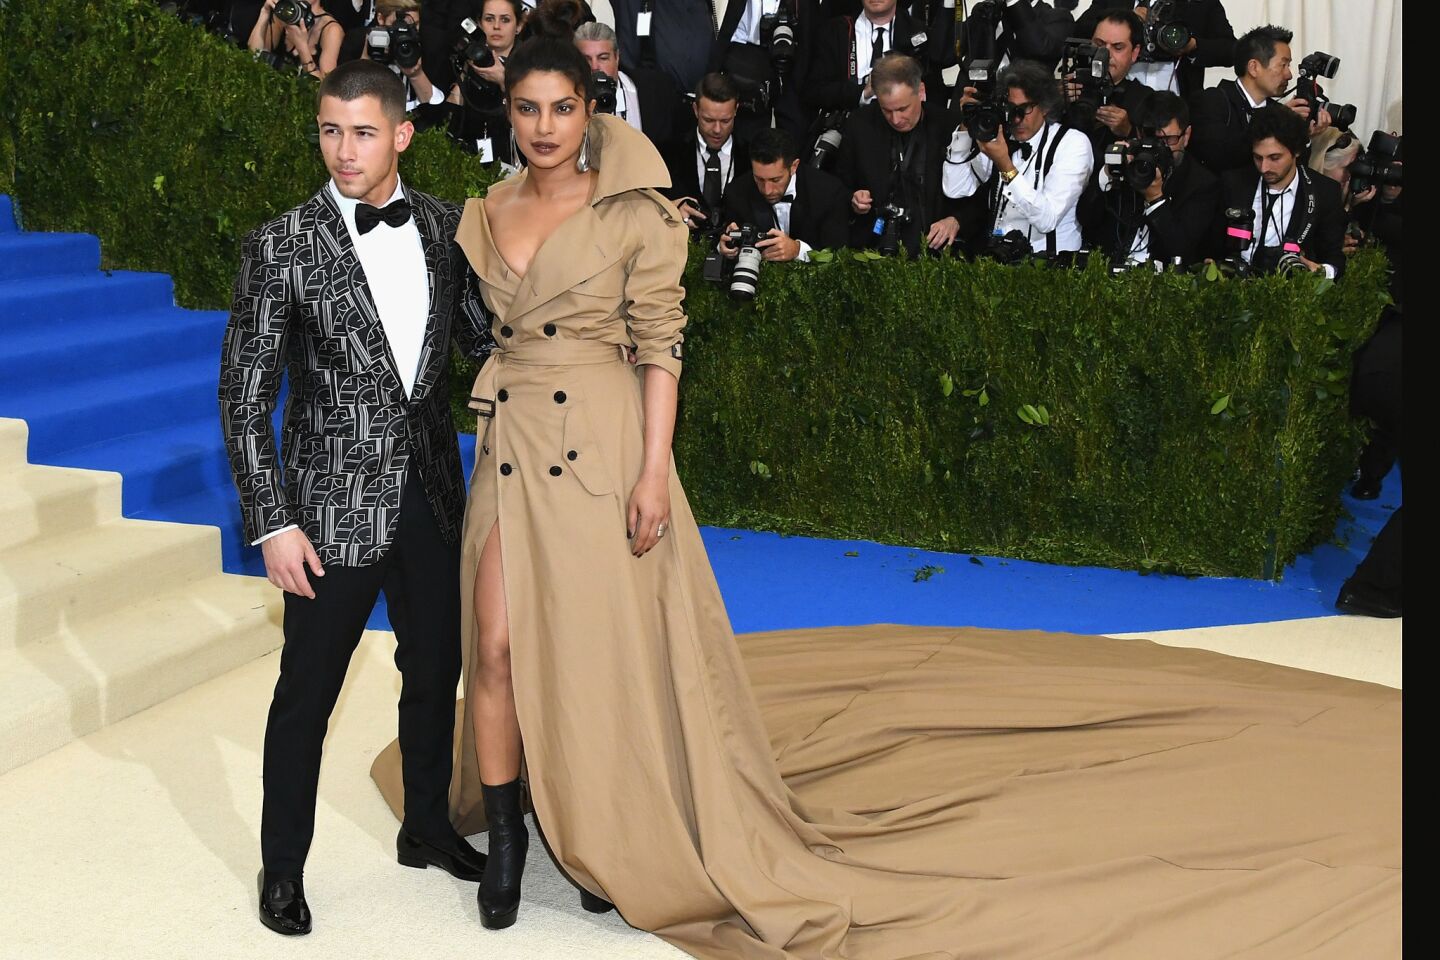 Nick Jonas in a black and white Art Deco jacquard tuxedo jacket and black tuxedo pants from Ralph Lauren Purple Label, with Priyanka Chopra in a Ralph Lauren Collection cstom trench coat evening Gown on the red carpet at the 2017 Met Gala.